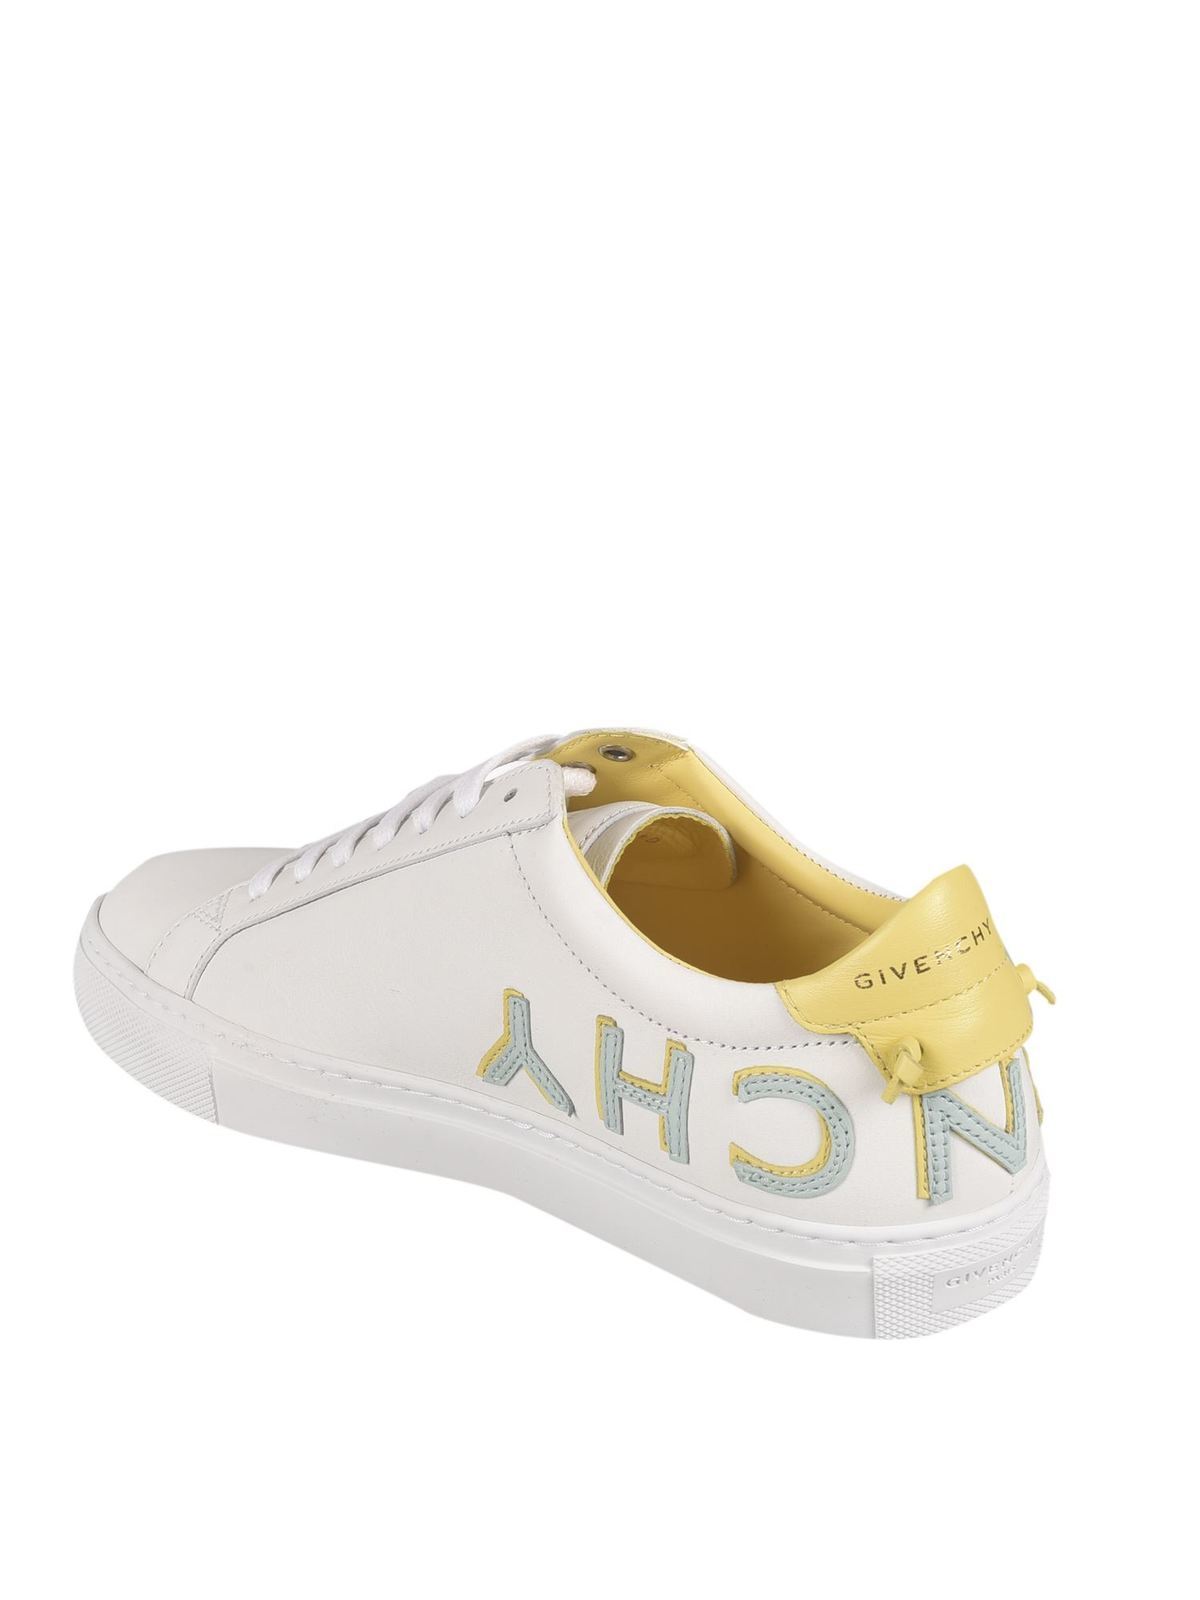 Trainers Givenchy - Urban Street sneakers in white and yellow -  BE0003E0DF969